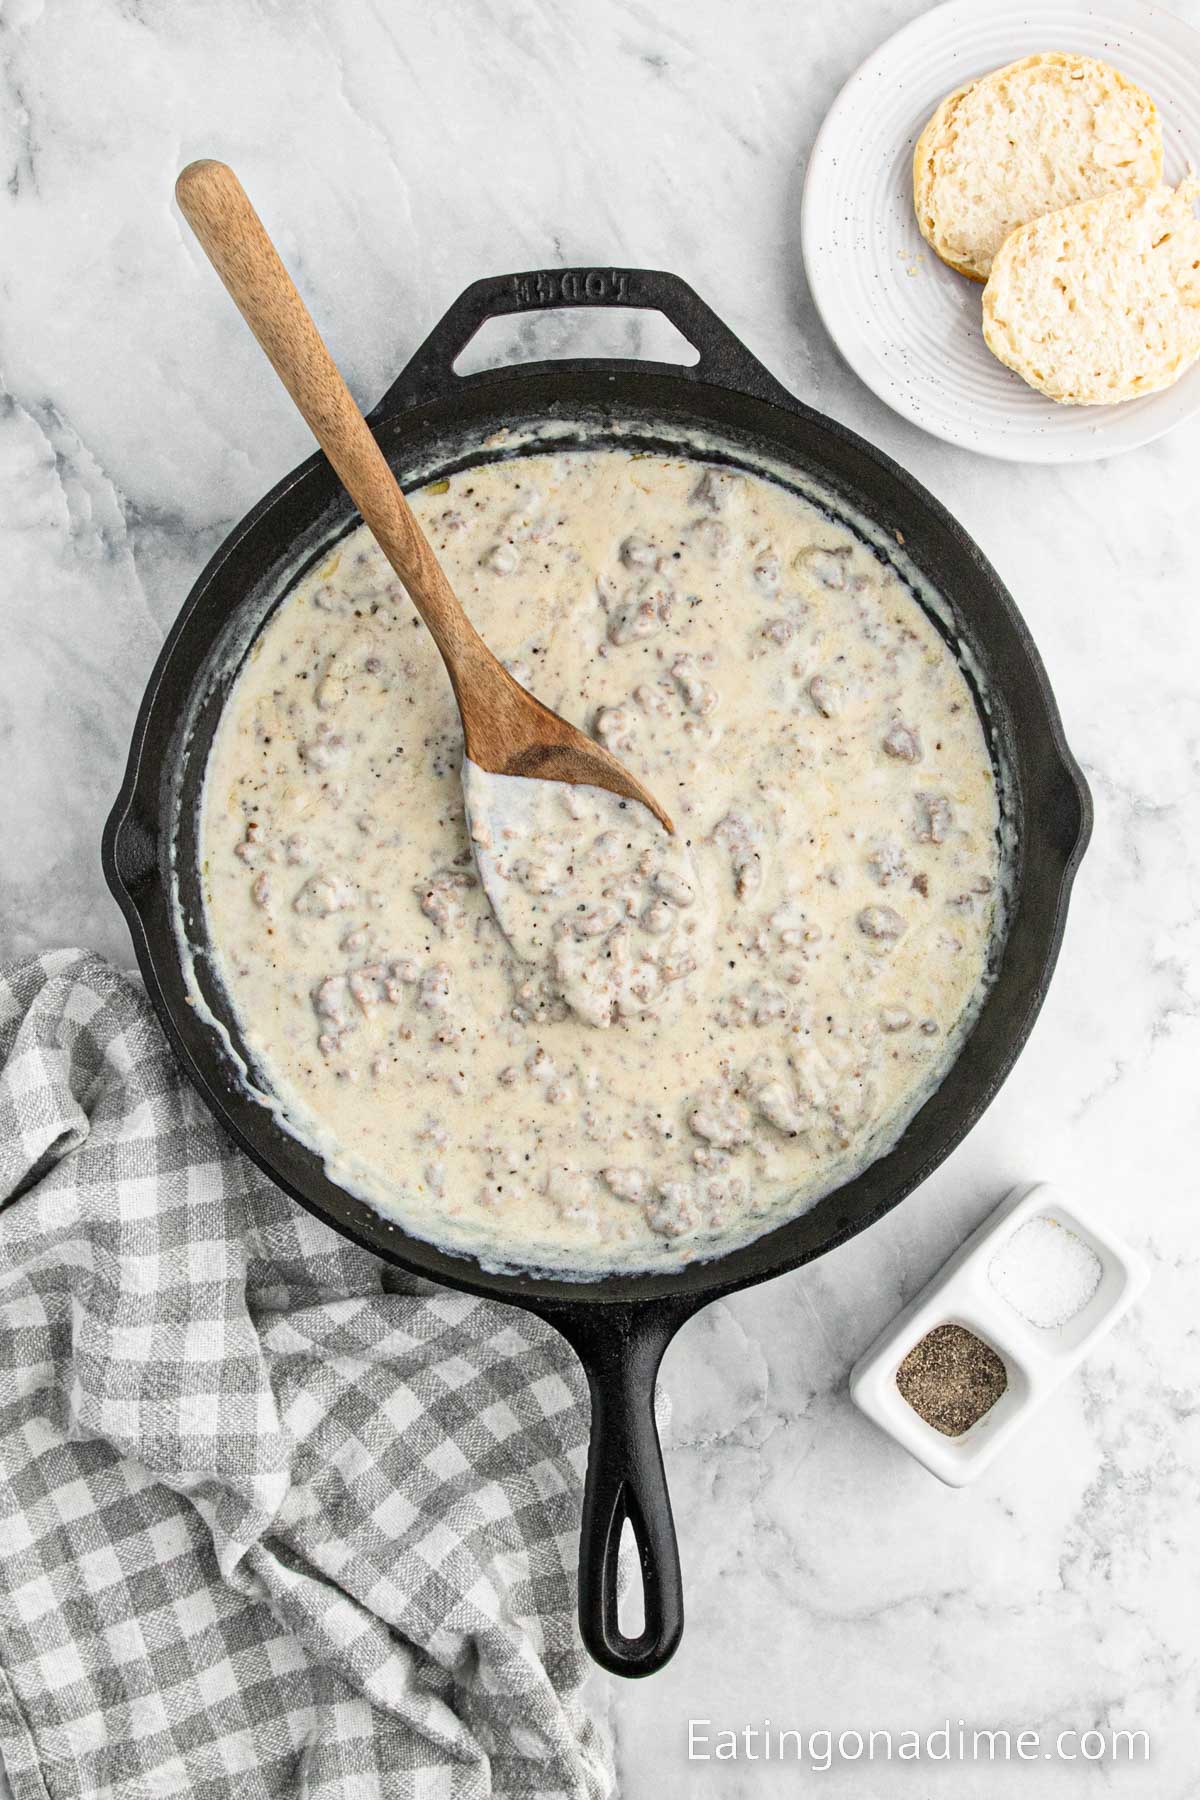 Sausage Gravy cooking in a cast iron skillet with a wooden spoon